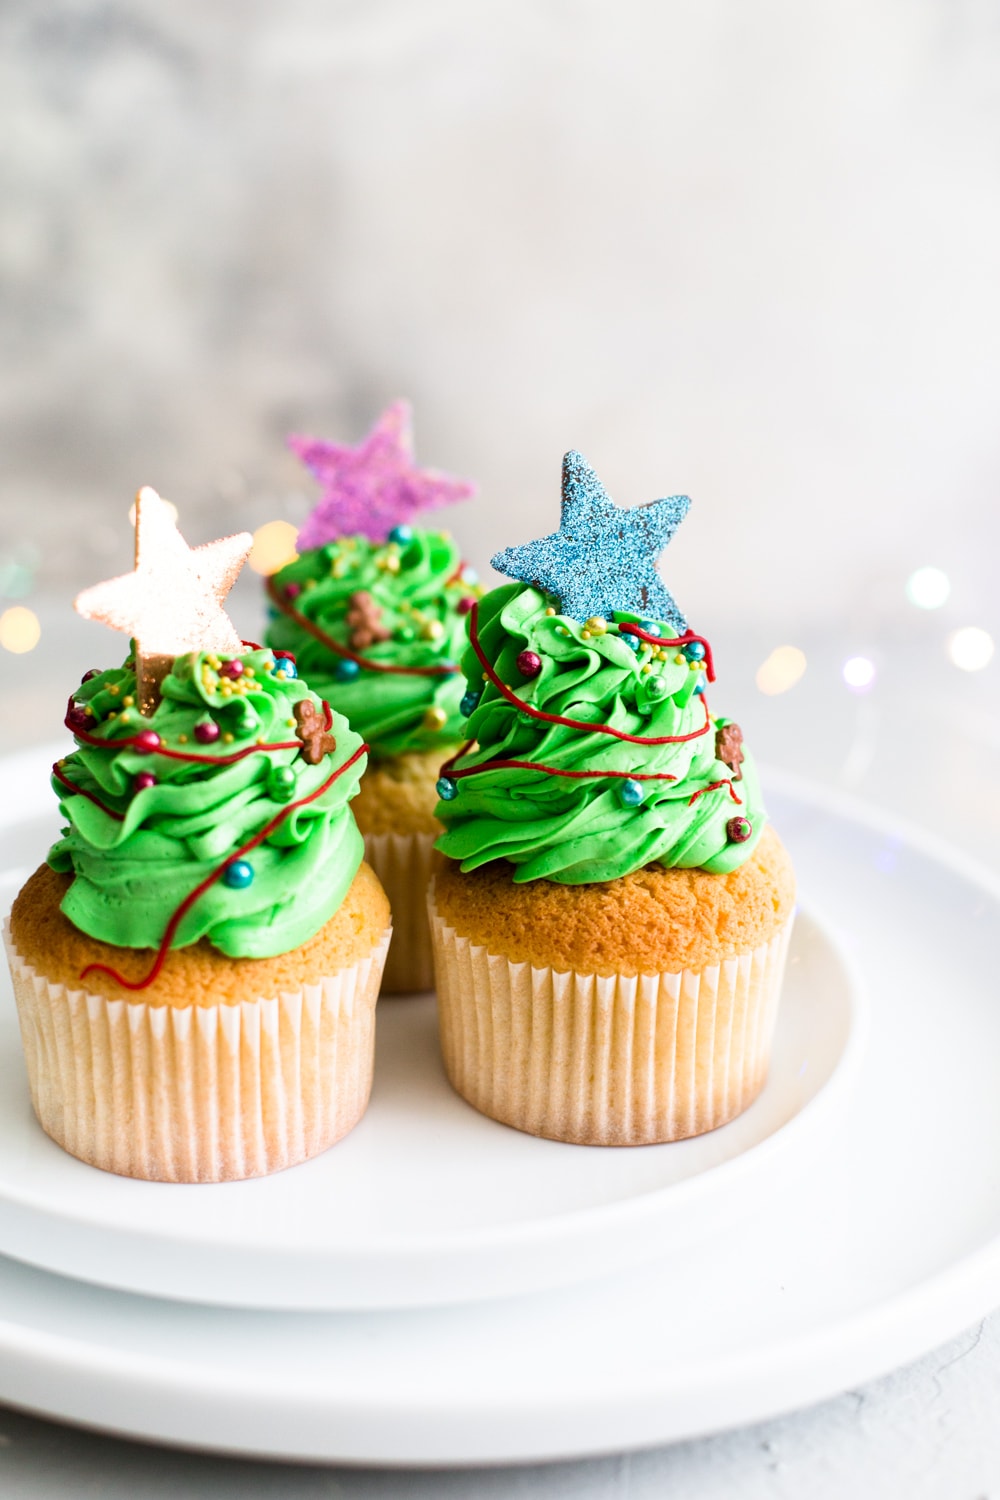 Tender and delicious Vegan Vanilla Cupcakes that everyone will love. Iced with Vanilla Buttercream Frosting and perfect for birthdays. #vegan #cupcakes #dessert #cake #vegancupcakes #vanilla #christmas #xmas #holidays #baking #veganbaking